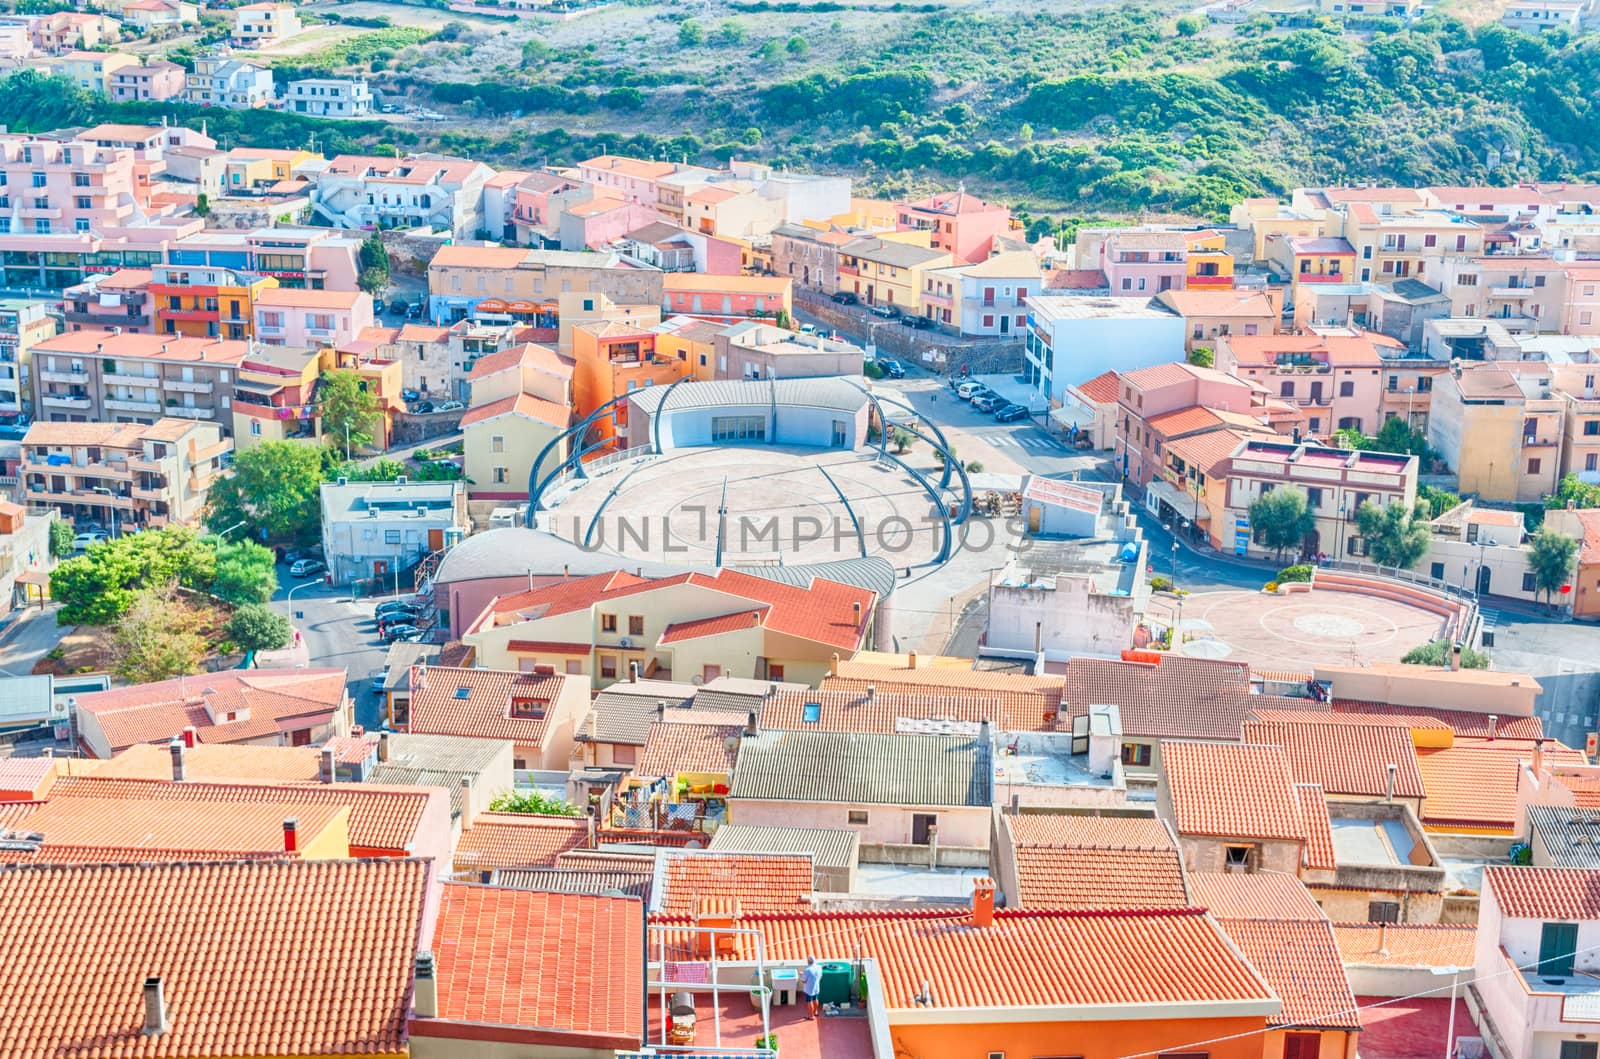 View of Castelsardo square from above in hdr by replica